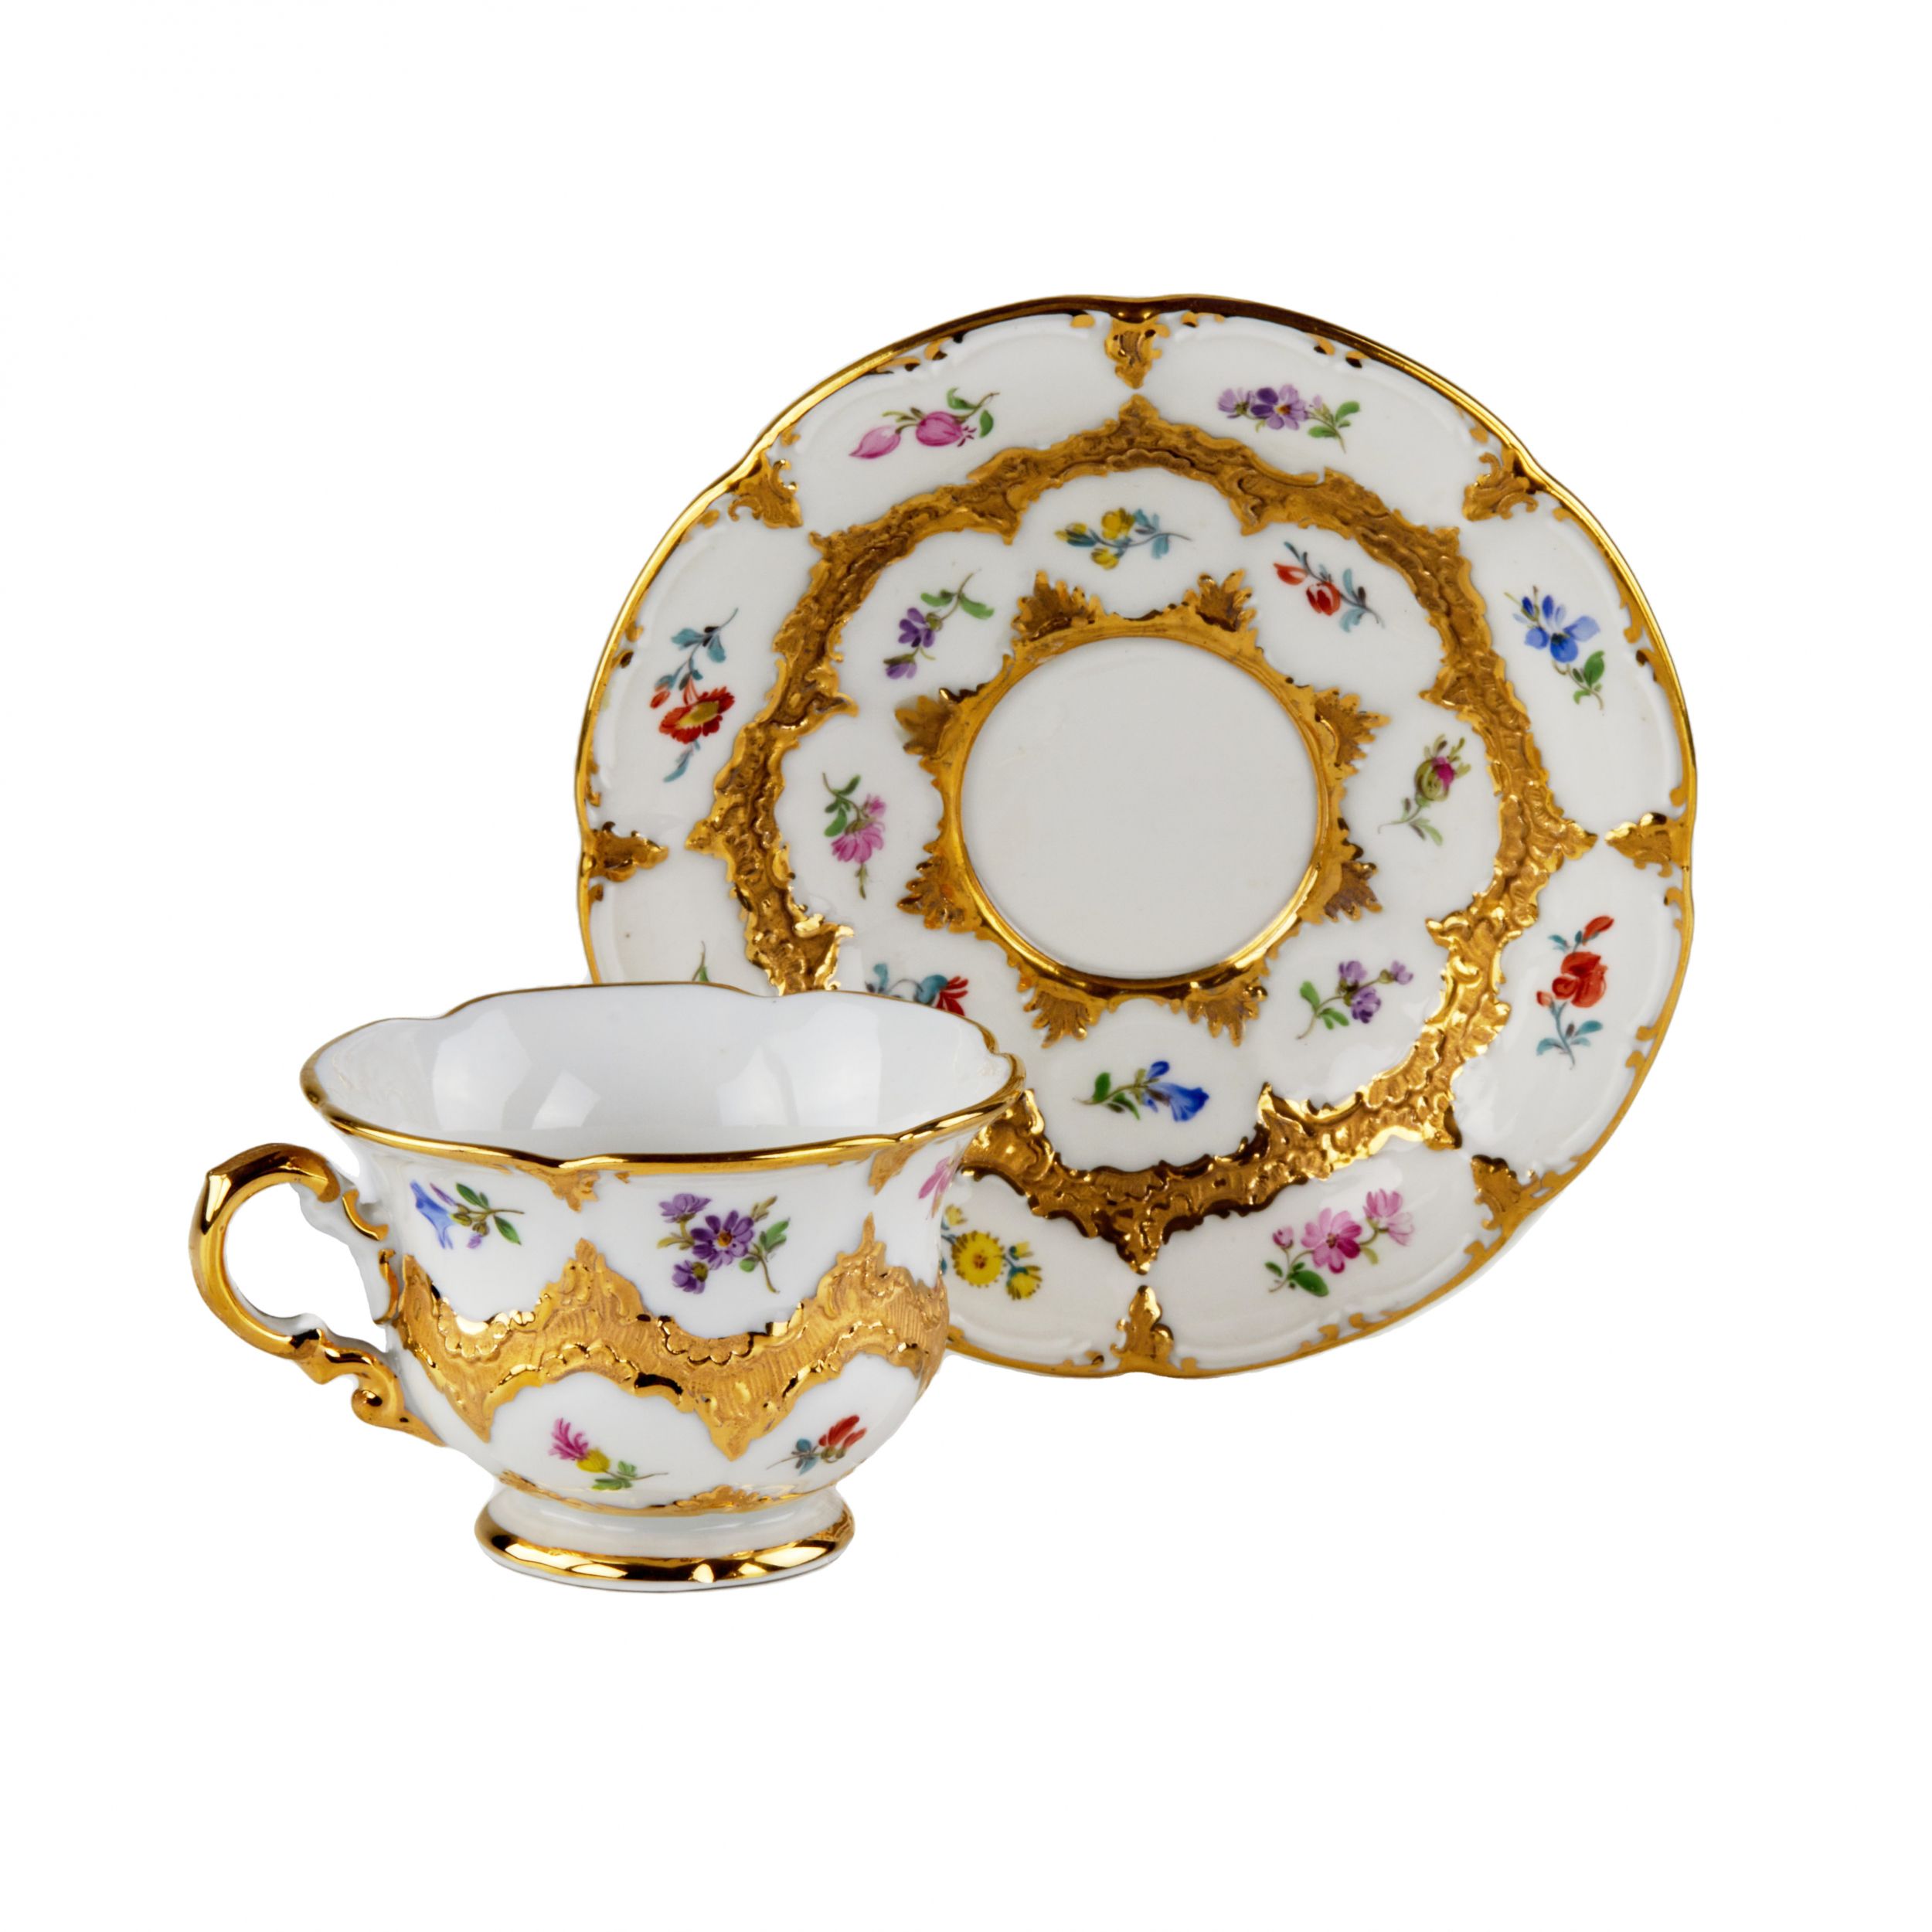 Meissen coffee service for 6 persons. - Image 4 of 9